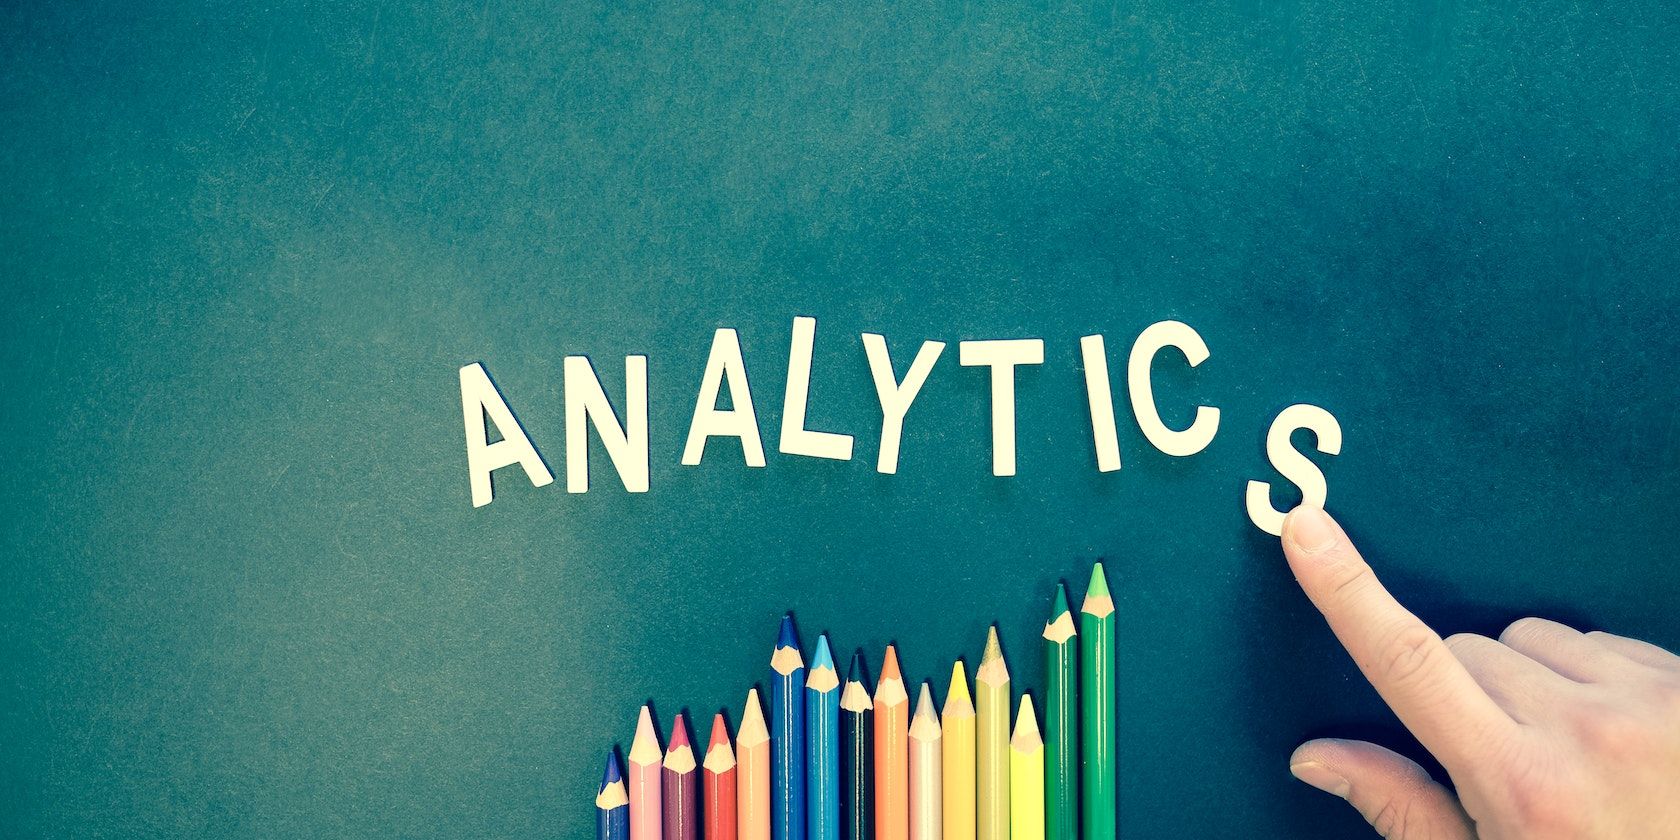 A finger arranges letters to spell the word 'Analytics' above a row of coloured pencils